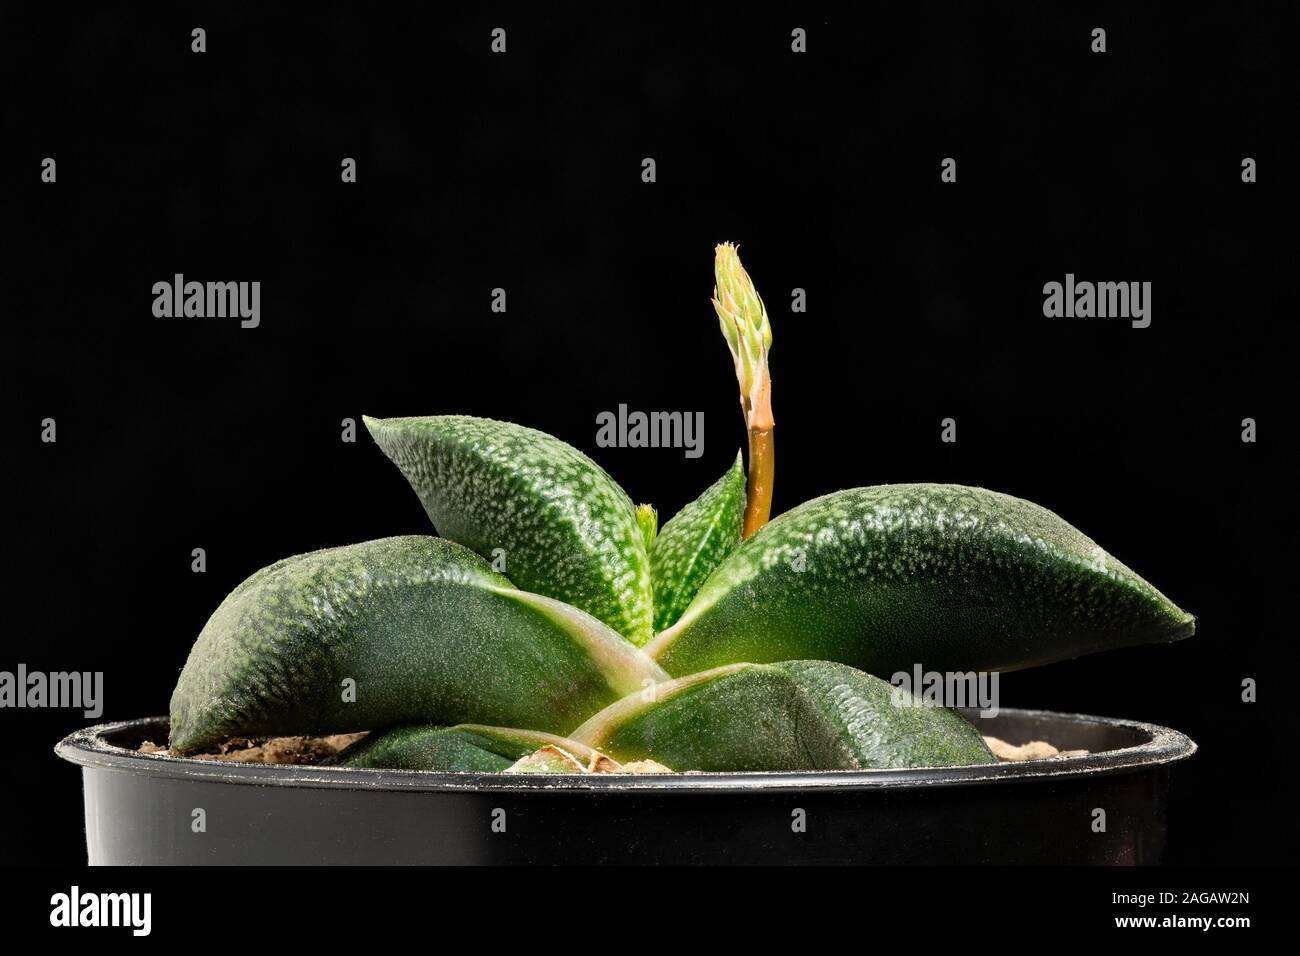 Gasteria armstrongii, a succulent plant from South Africa. Stock Photo